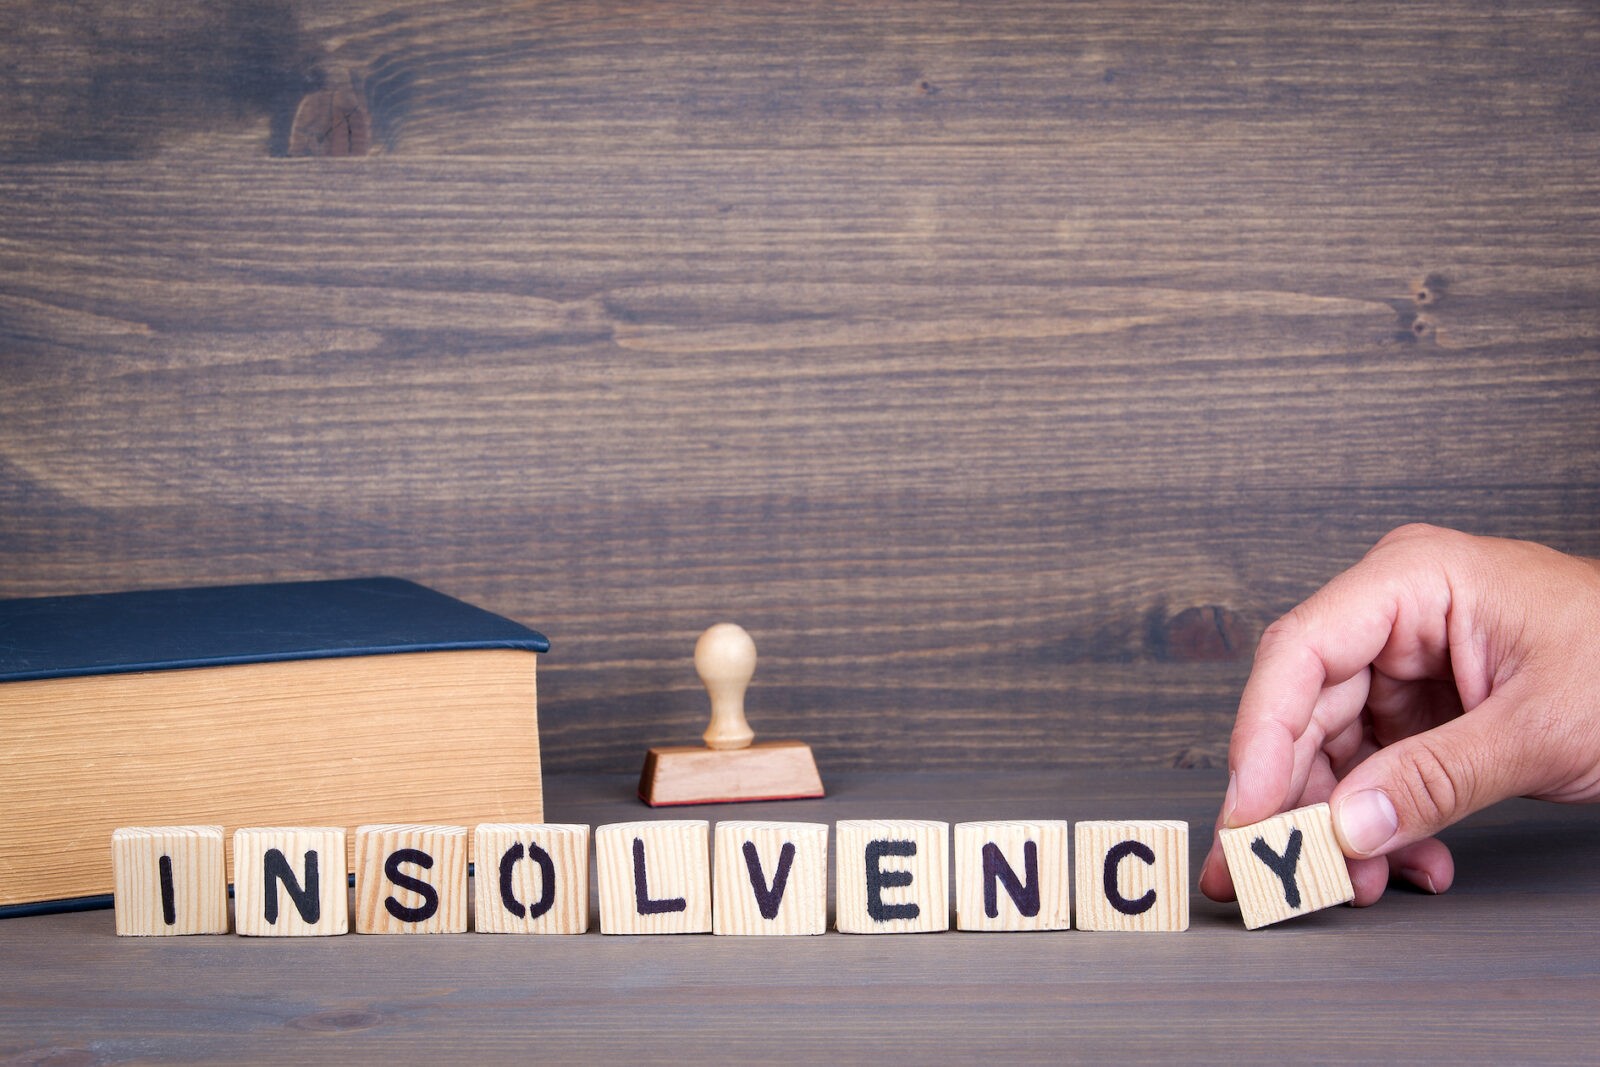 Insolvency services and those abusing financial support